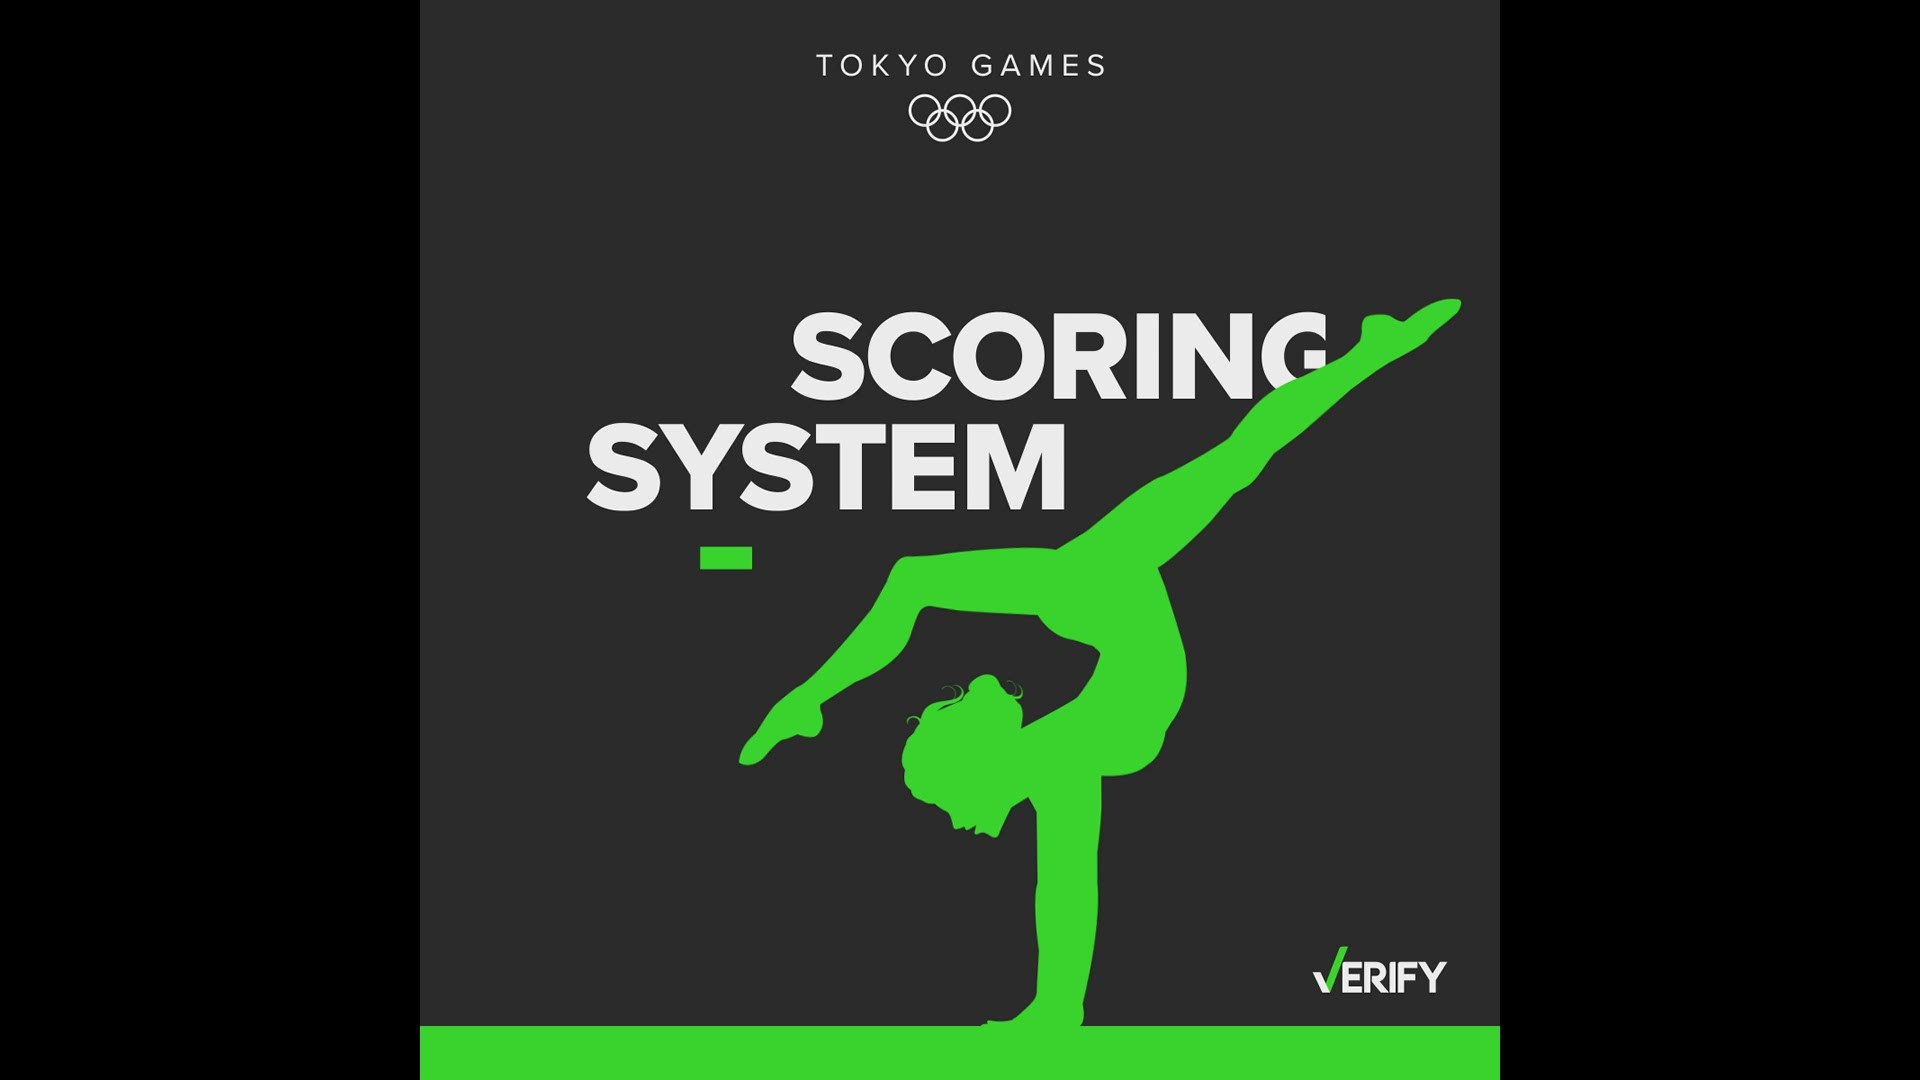 Under the current scoring system, gymnasts receive two scores: a difficulty score and an execution score. Those scores are then added together.